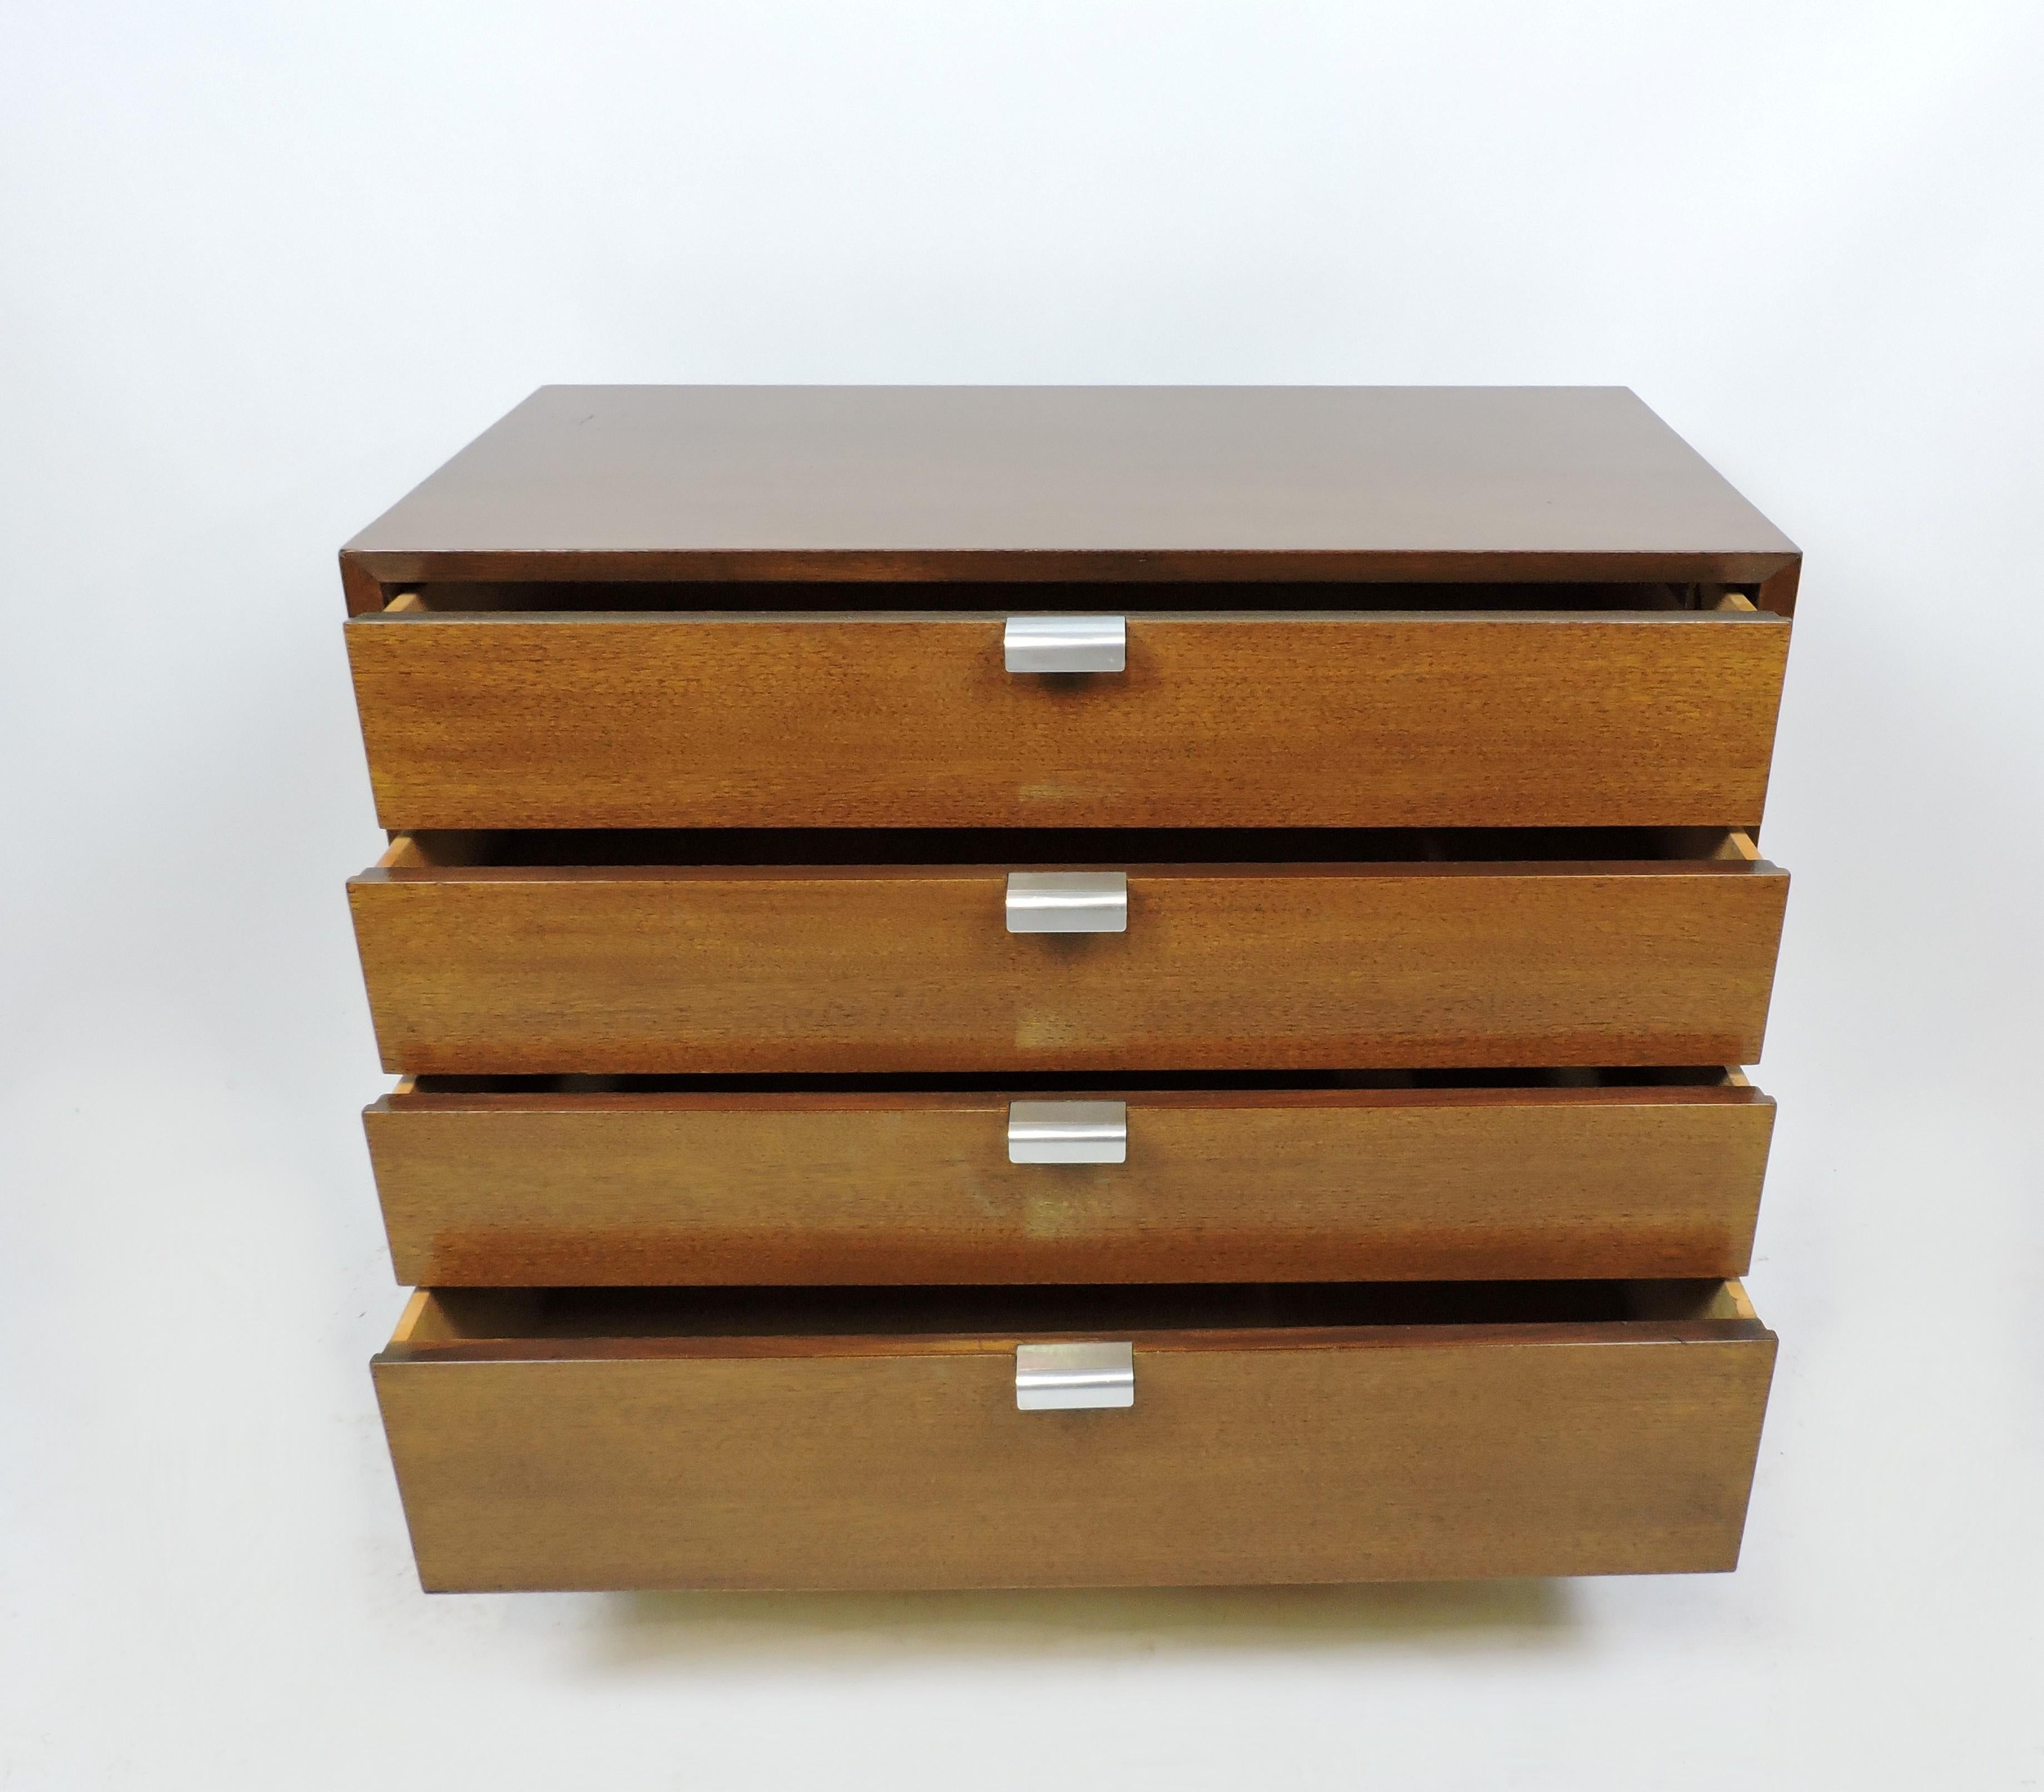 Handsome and distinctive walnut chest of drawers designed by George Nelson and manufactured by Herman Miller. Part of the Basic Cabinet Series, this cabinet has four drawers. Classic J shaped aluminum pulls and black block feet complete the look.